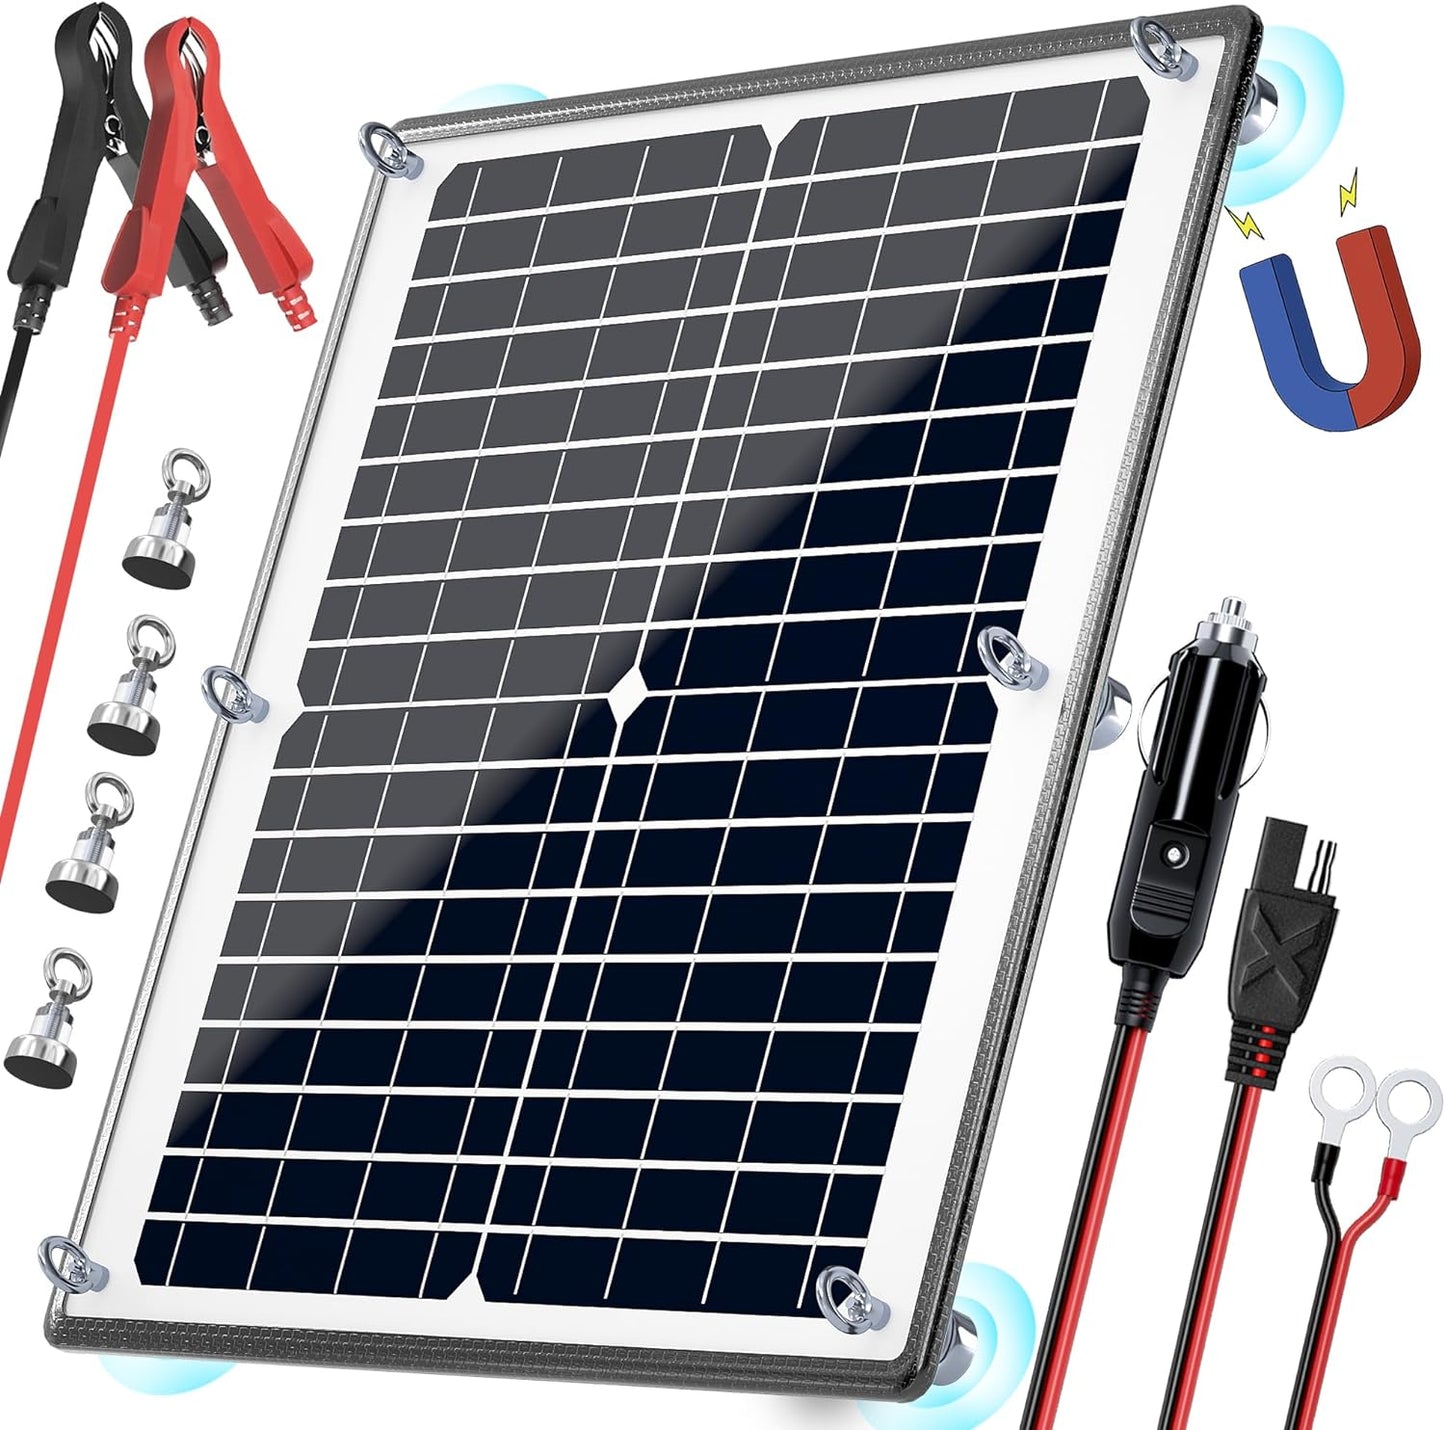 POWOXI Solar Panel Kit 12V 20W Magnetic + MPPT Charge Controller Waterproof Solar Battery Charger Maintainer Solar Trickle Charger Alligator Clip for Car Boat RV Motorcycle Marine, etc.